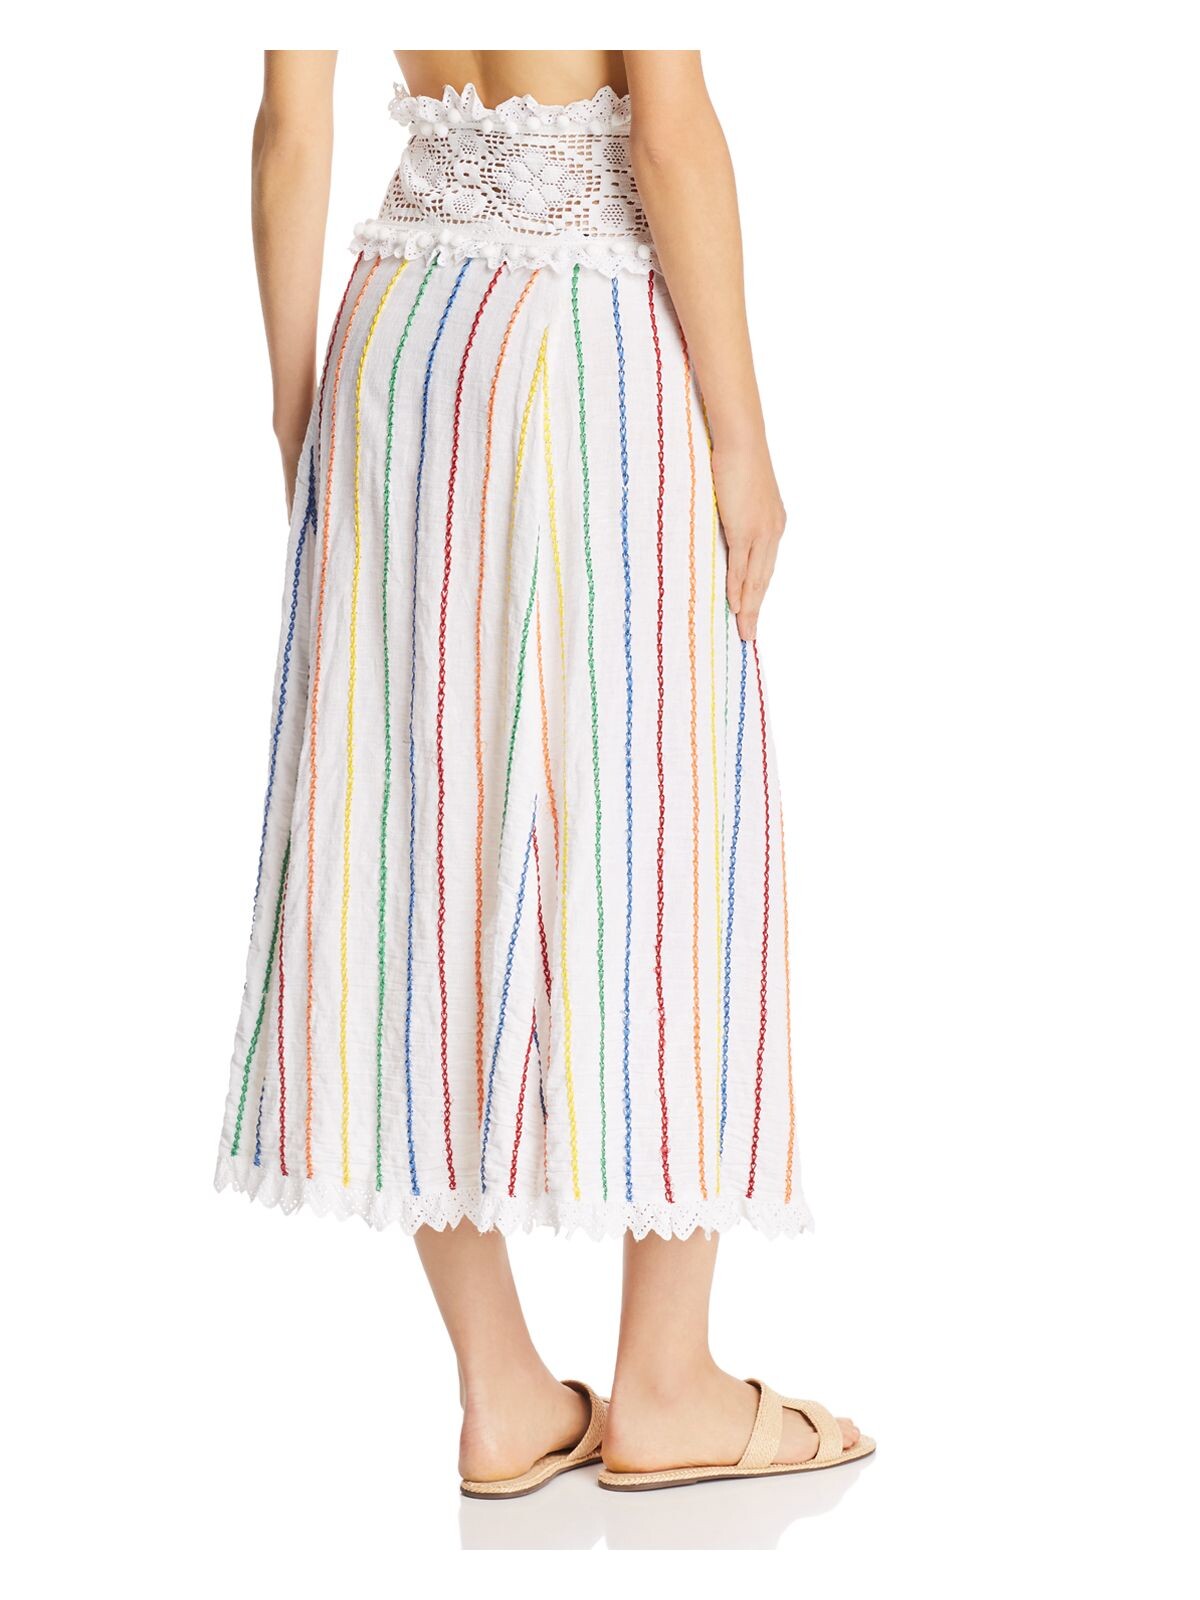 PLACE NATIONALE Womens White Lace Striped Tea-Length Accordion Pleat Skirt 2